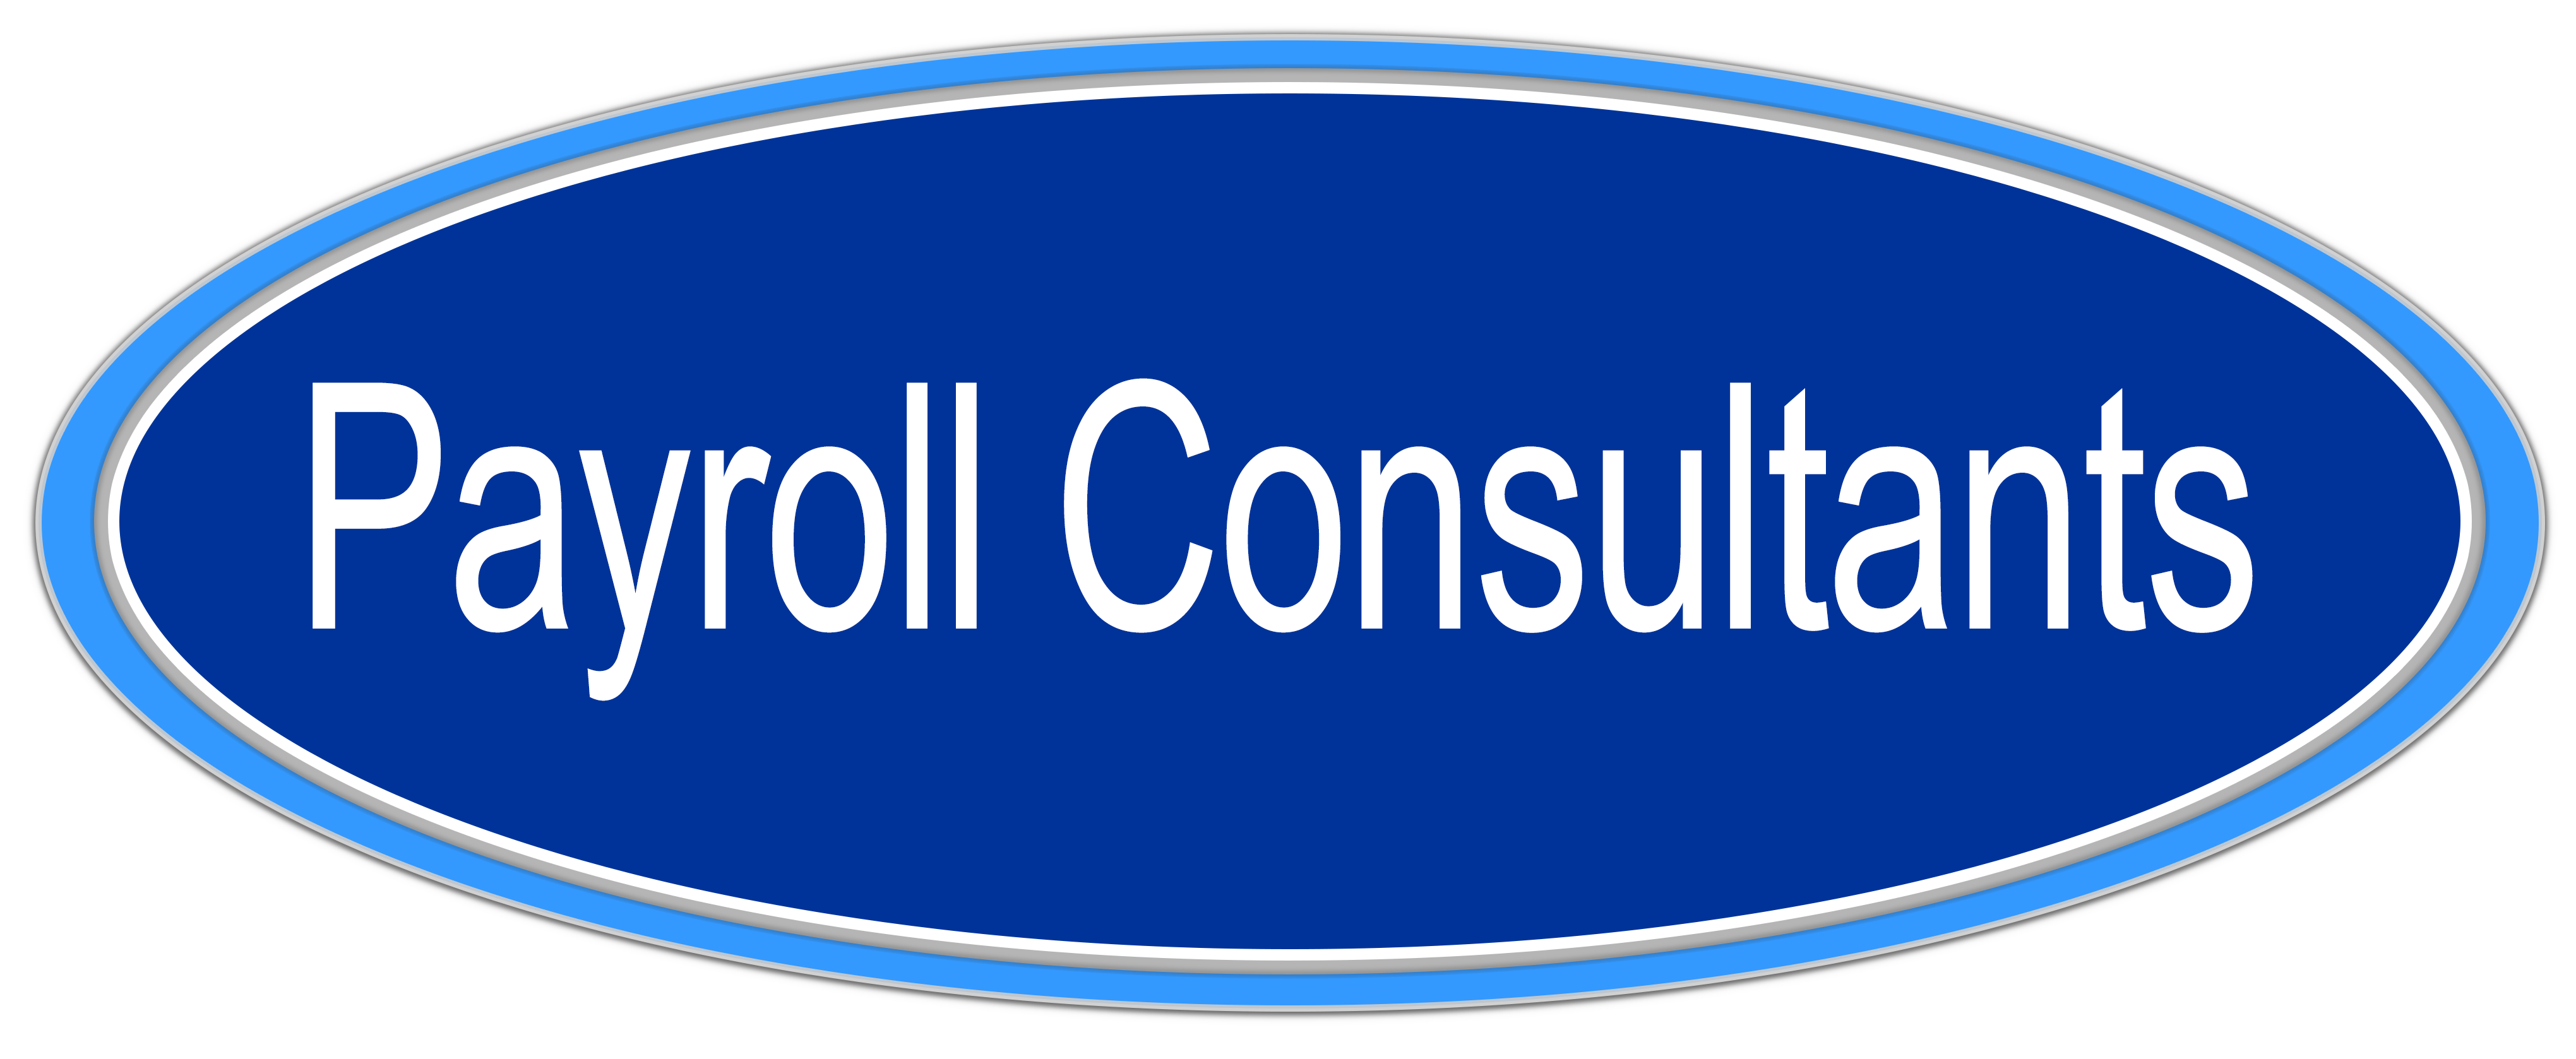 Workers Compensation Insurance Plans - Payroll Consultants